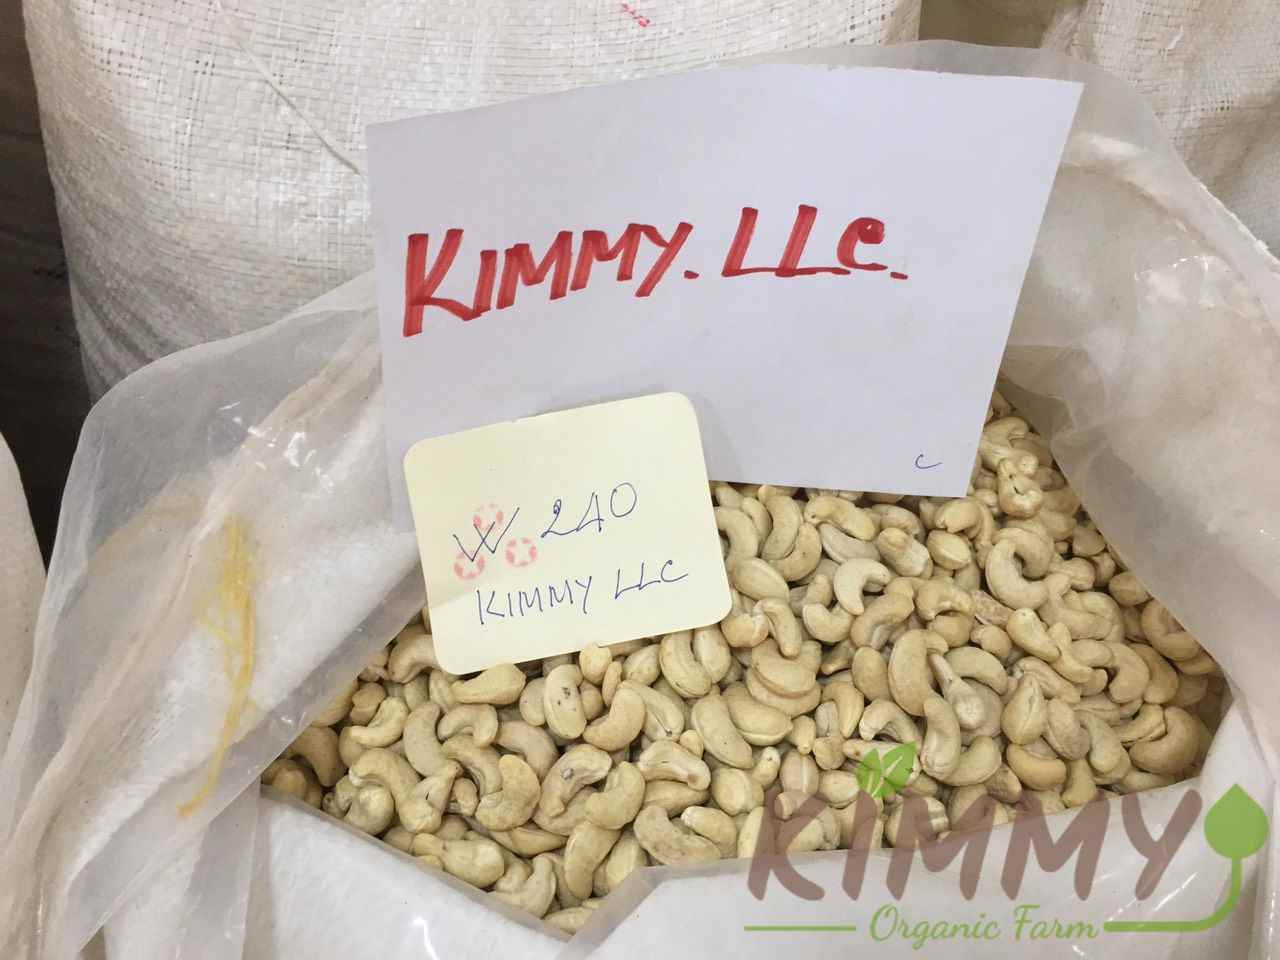 Vietnam W240 Cashew Nut White Whole Cashews High Quality Ready For Export Raw Image Of W240 From Our Cashew Factory! 1